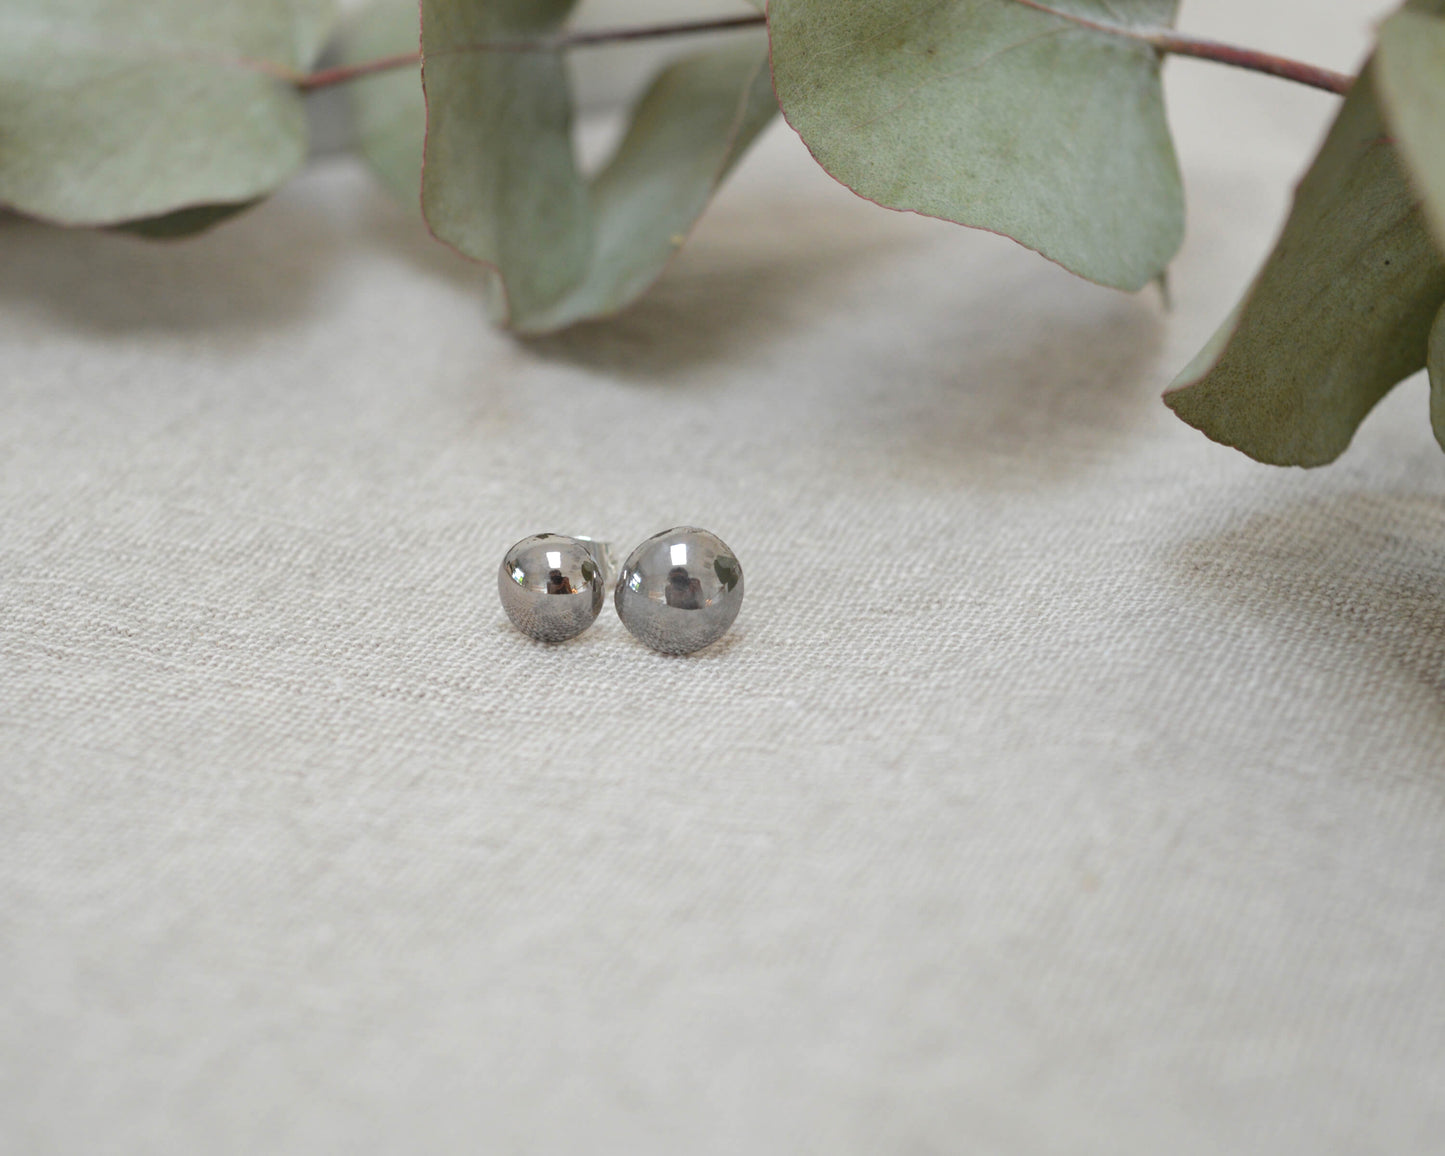 DROP Small porcelain earrings with gold or platinum decor